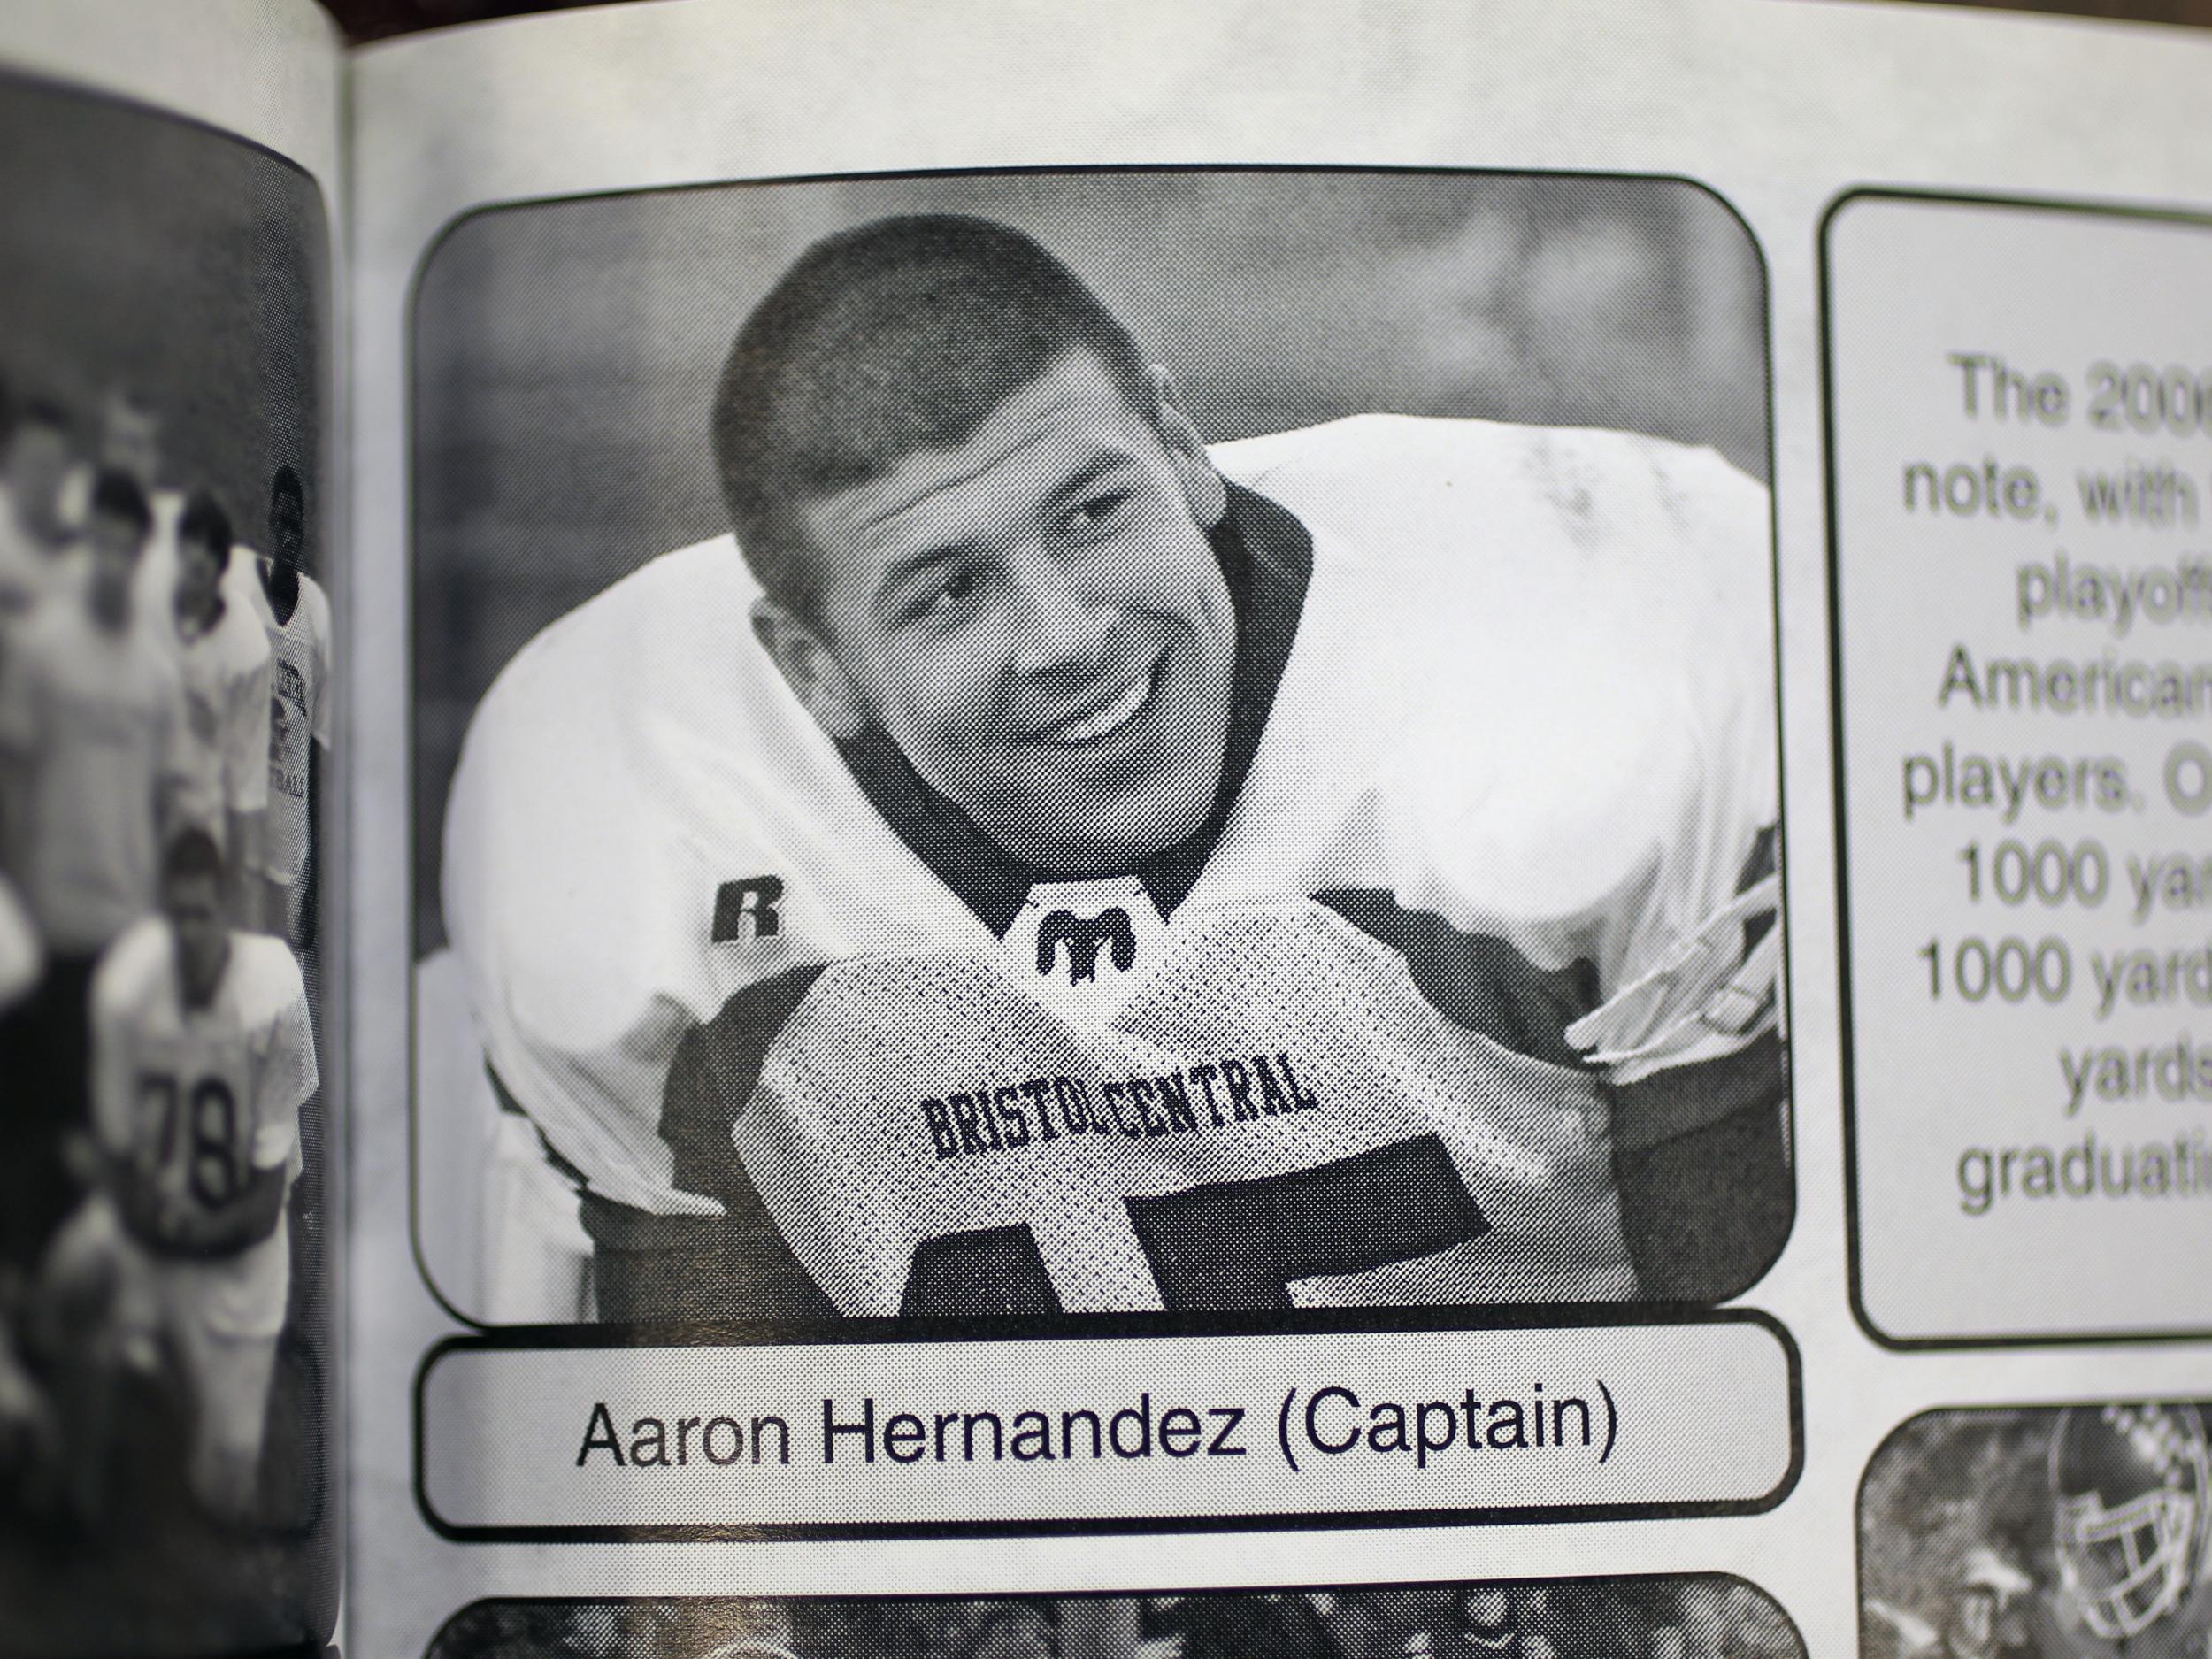 A yearbook photo showing Hernandez, captain of Bristol Central High School's football team